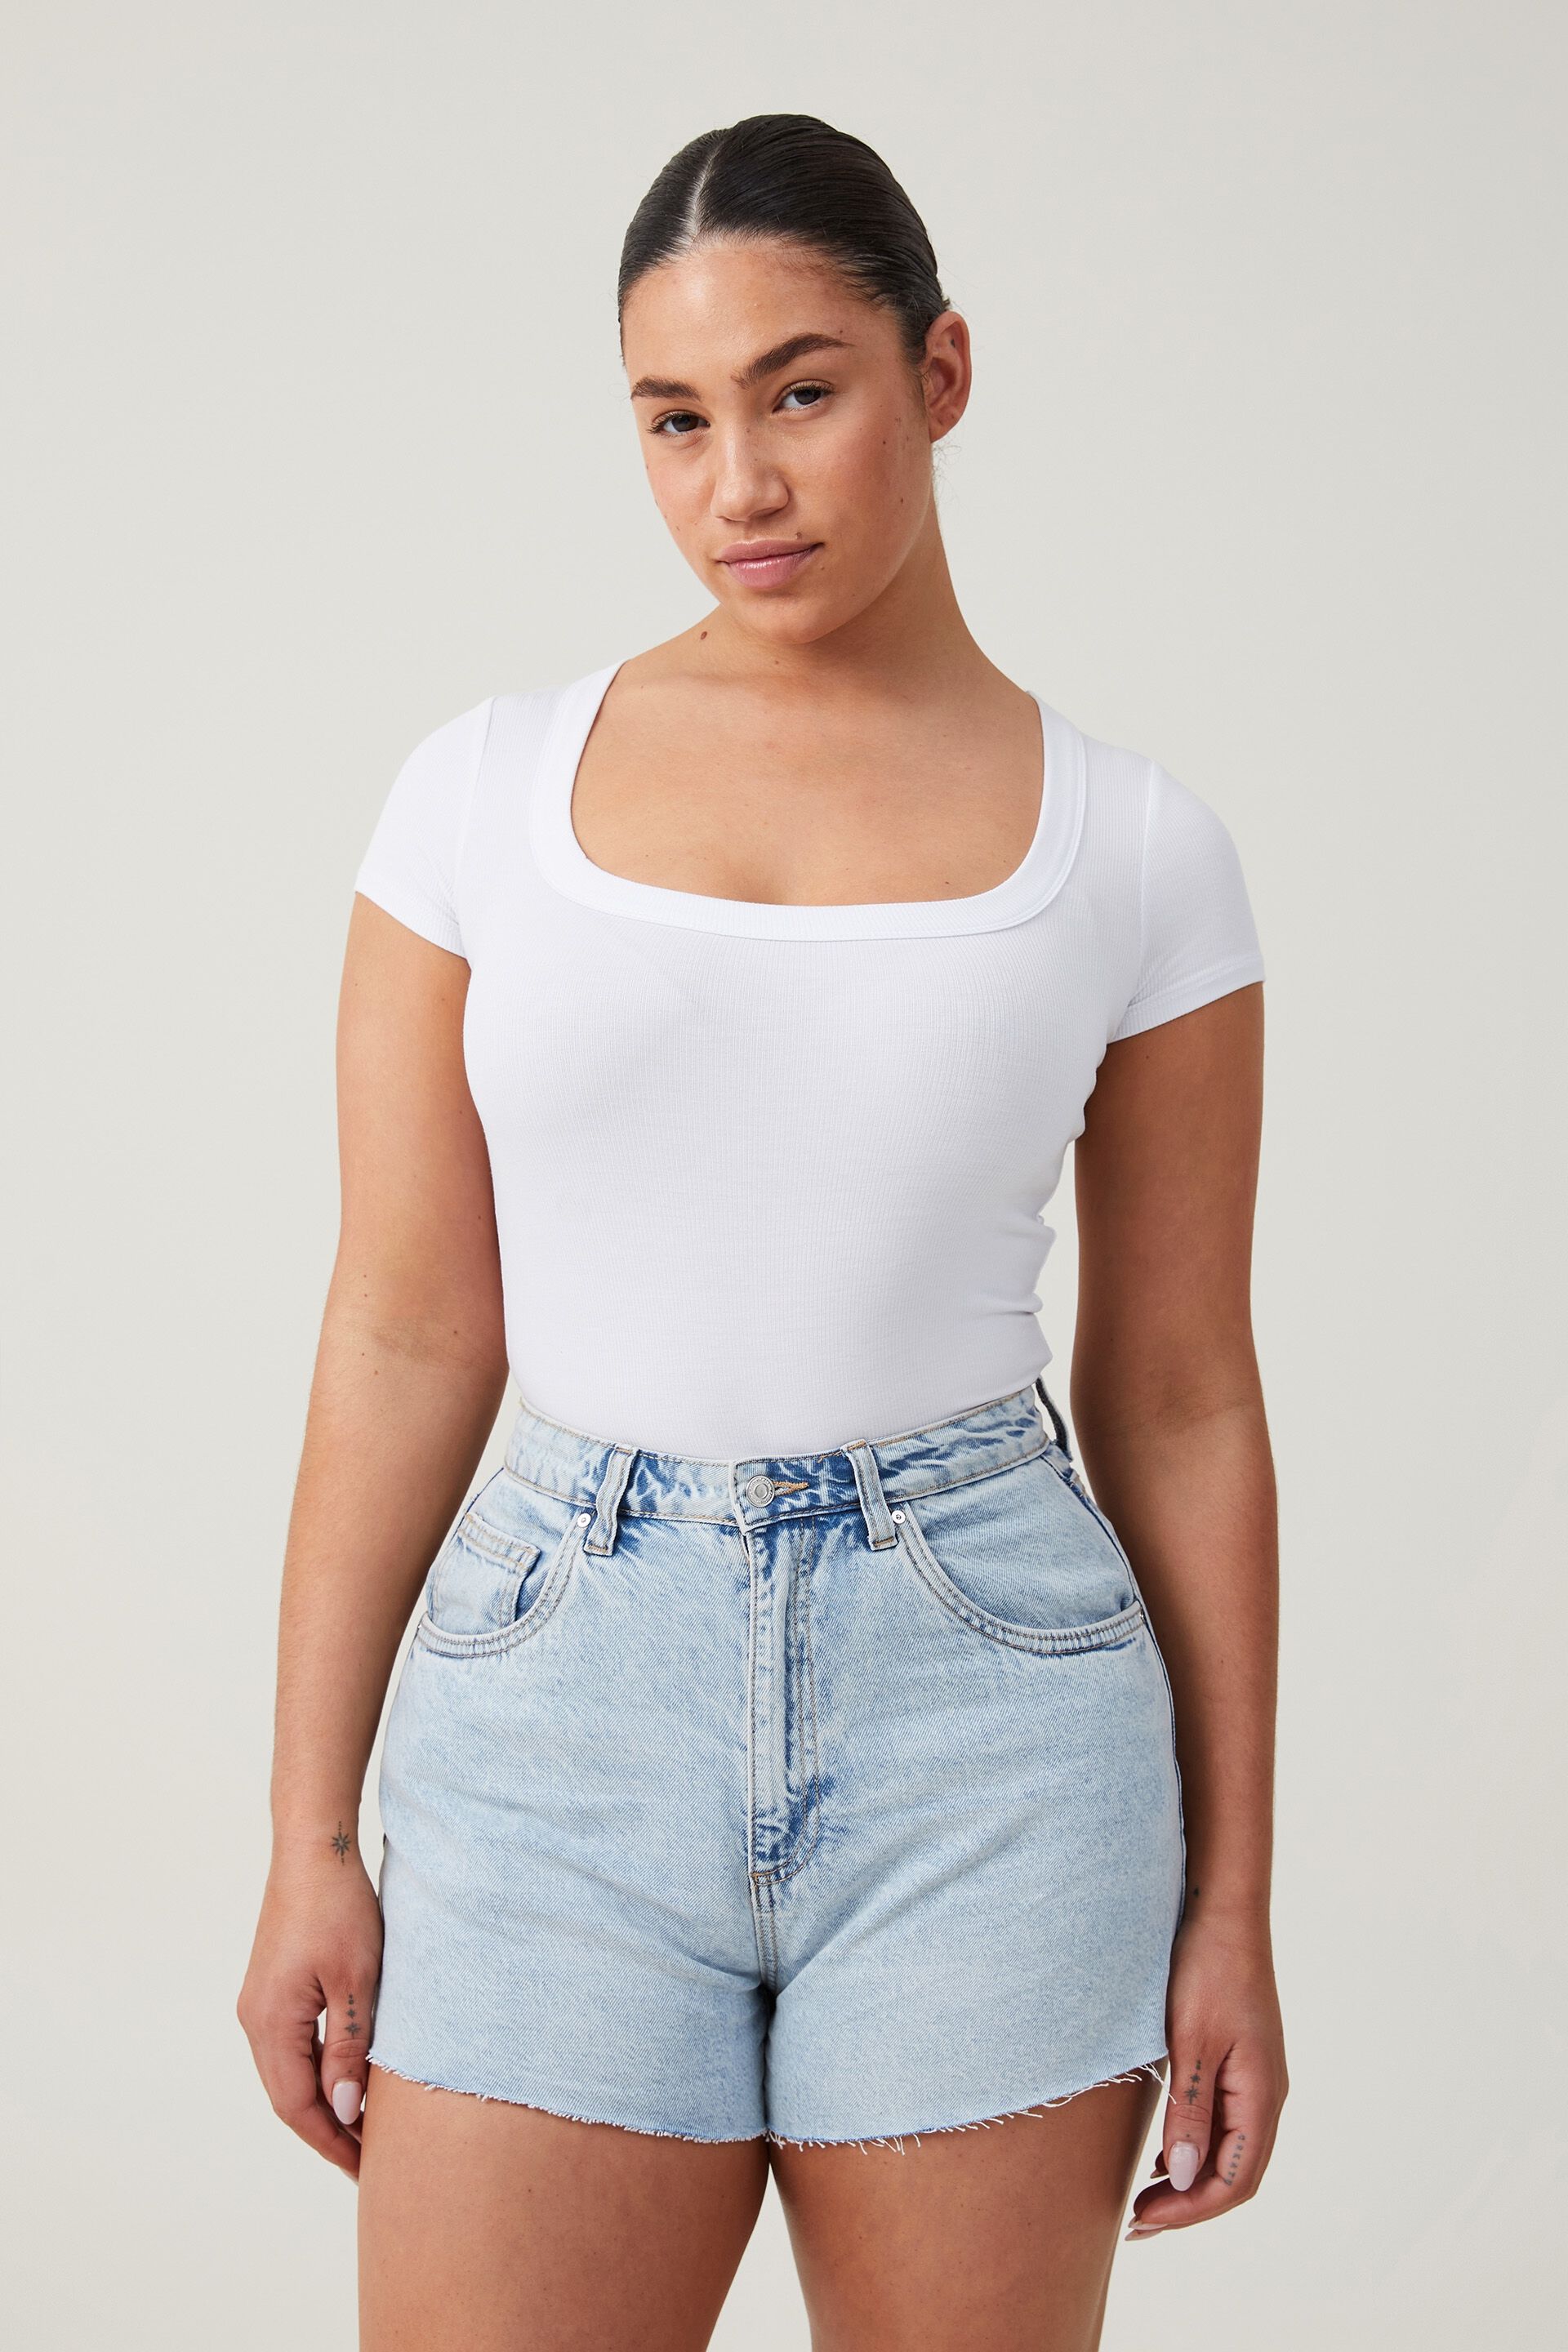 CURVY DENIM SHORTS YOU'LL WANT TO SLIP INTO ALL SUMMER - ilovejeans.com